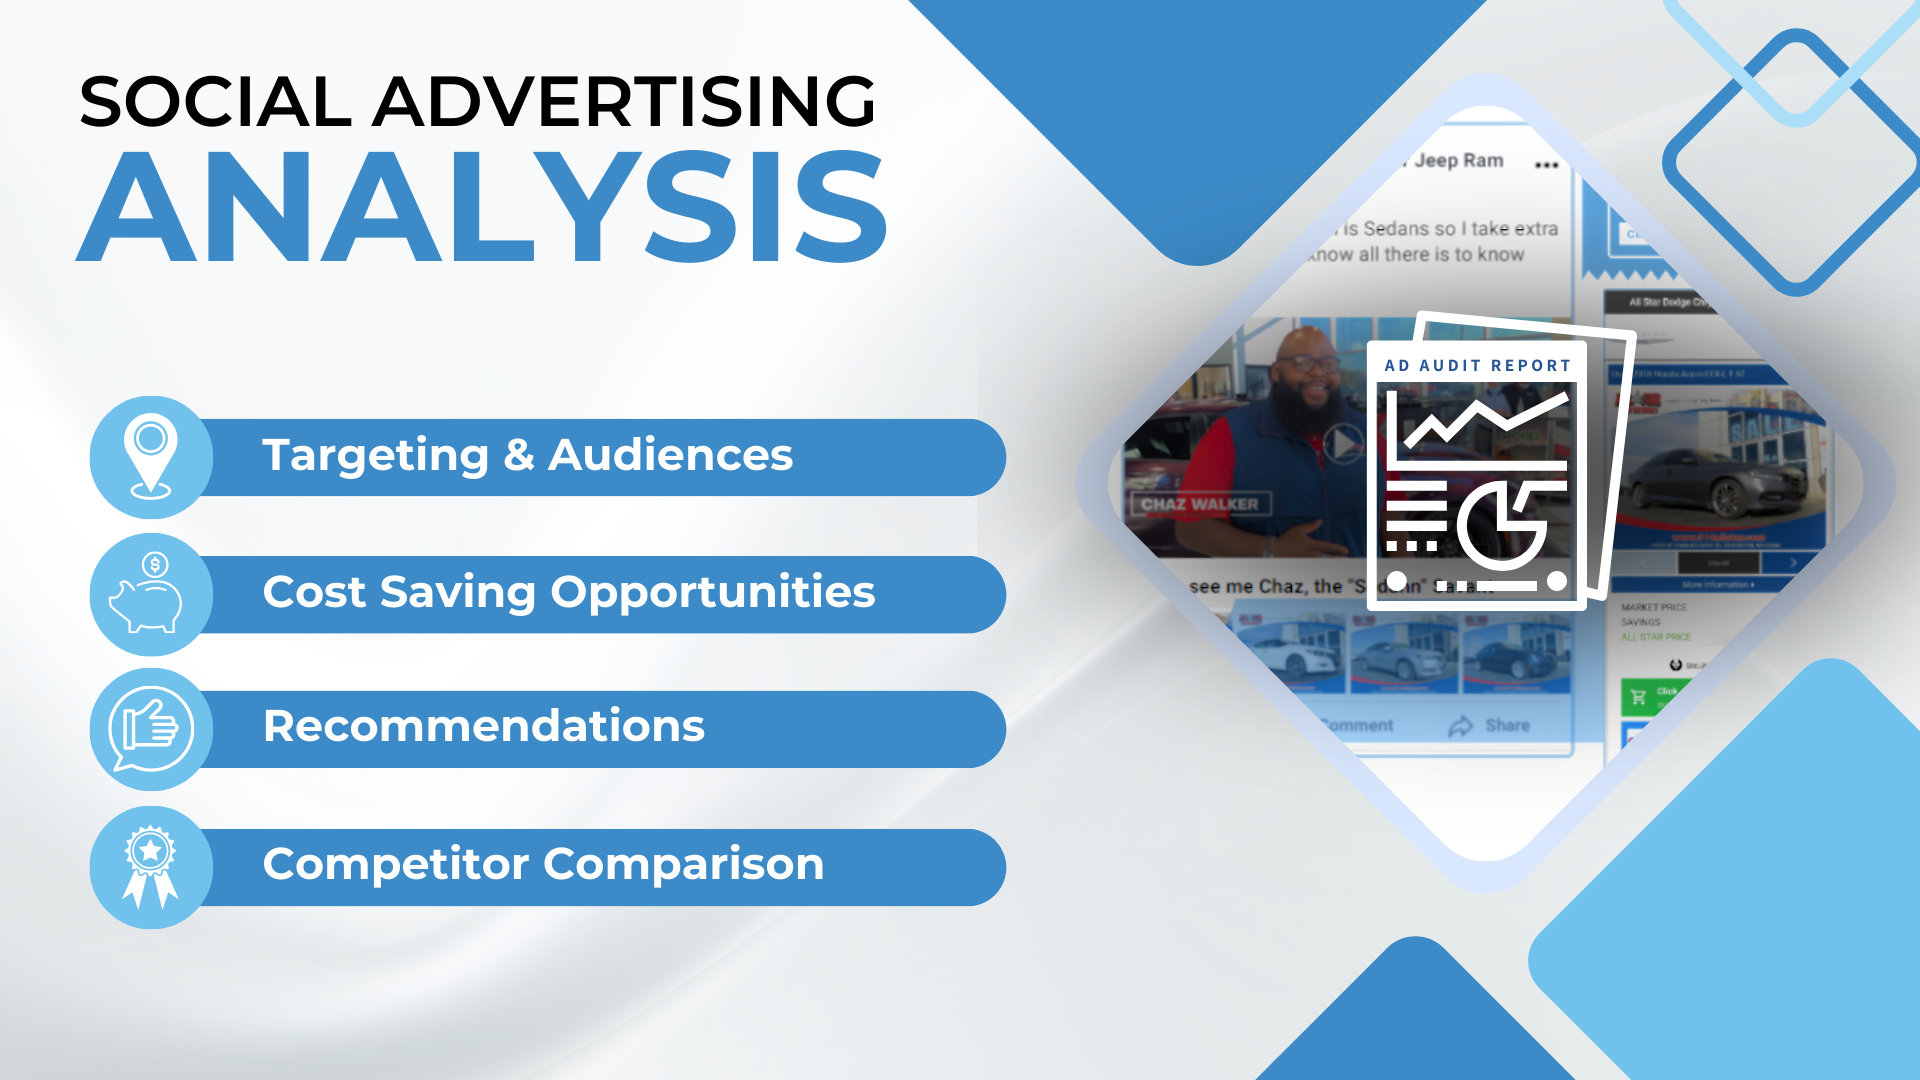 Free social advertising analysis from Parachute Video Ads